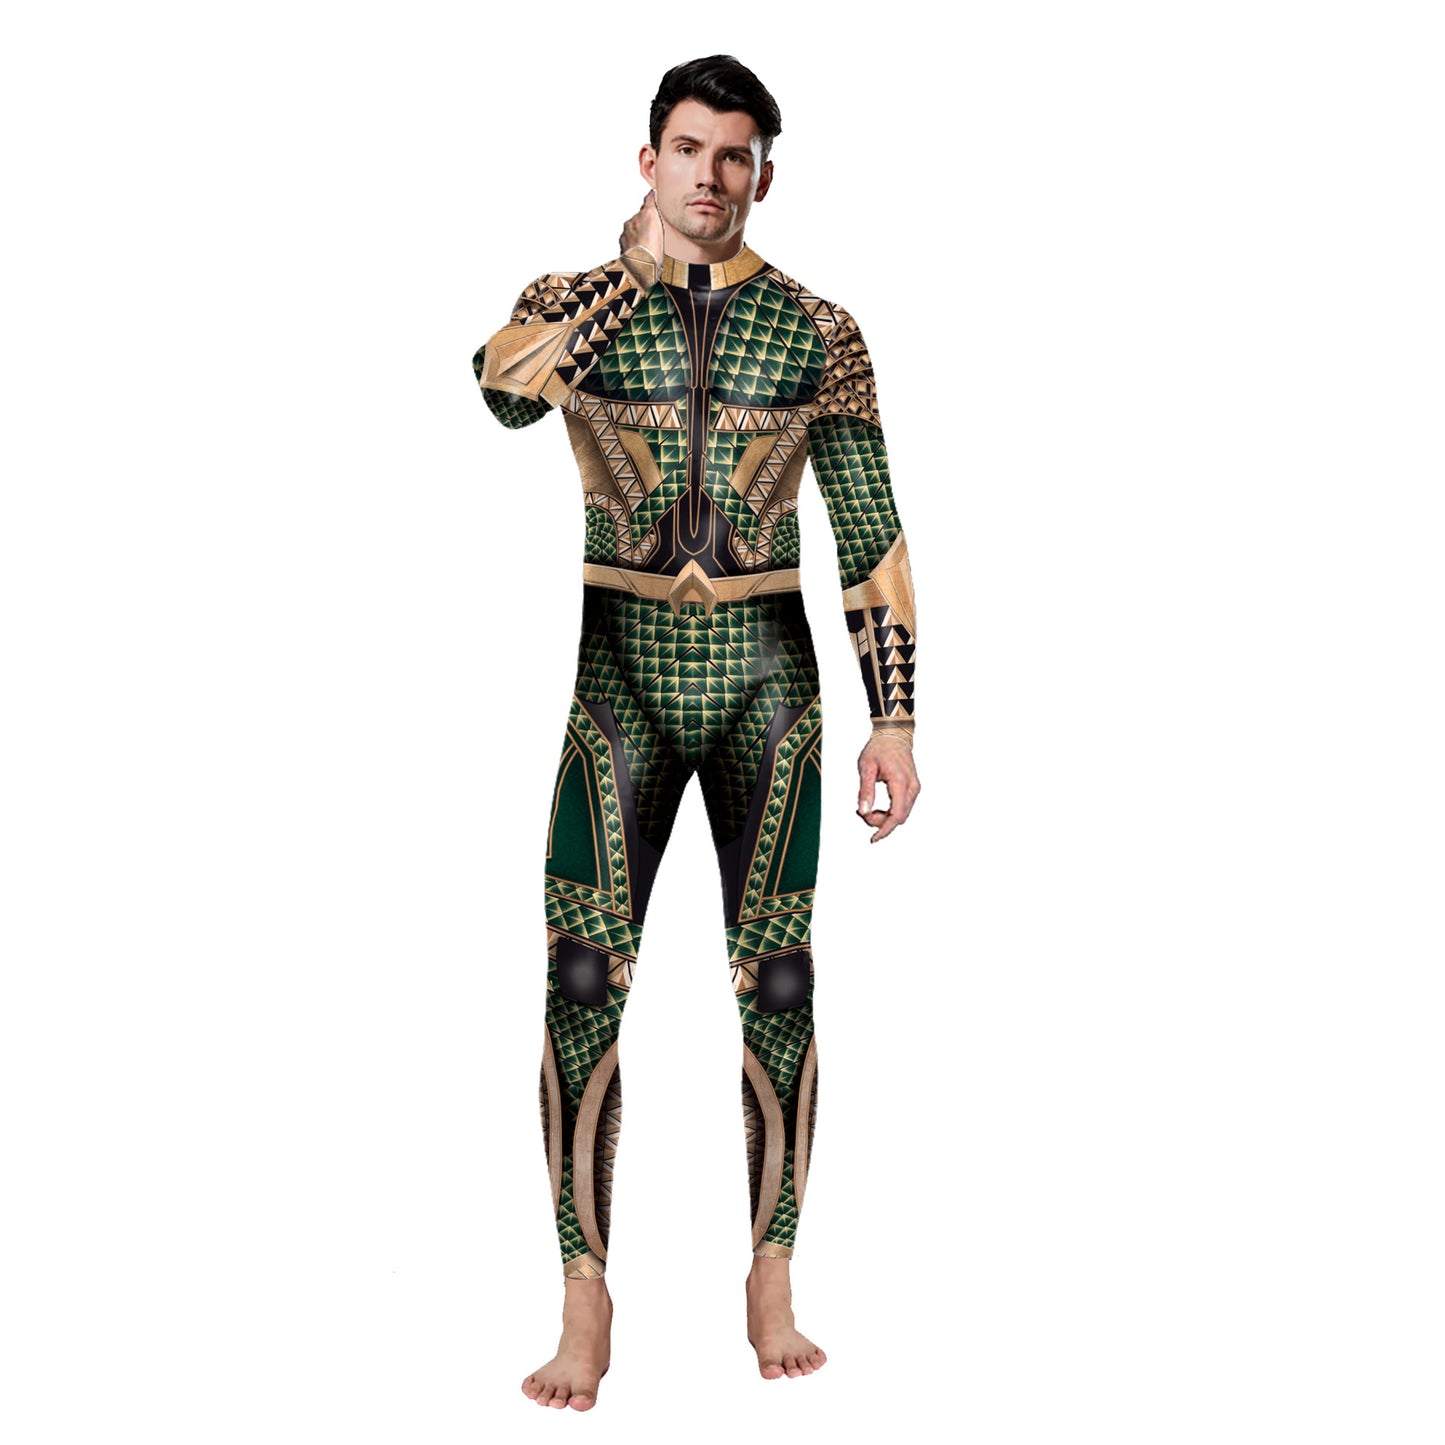 Autumn Halloween Costume Digital Printing Role-playing Tights